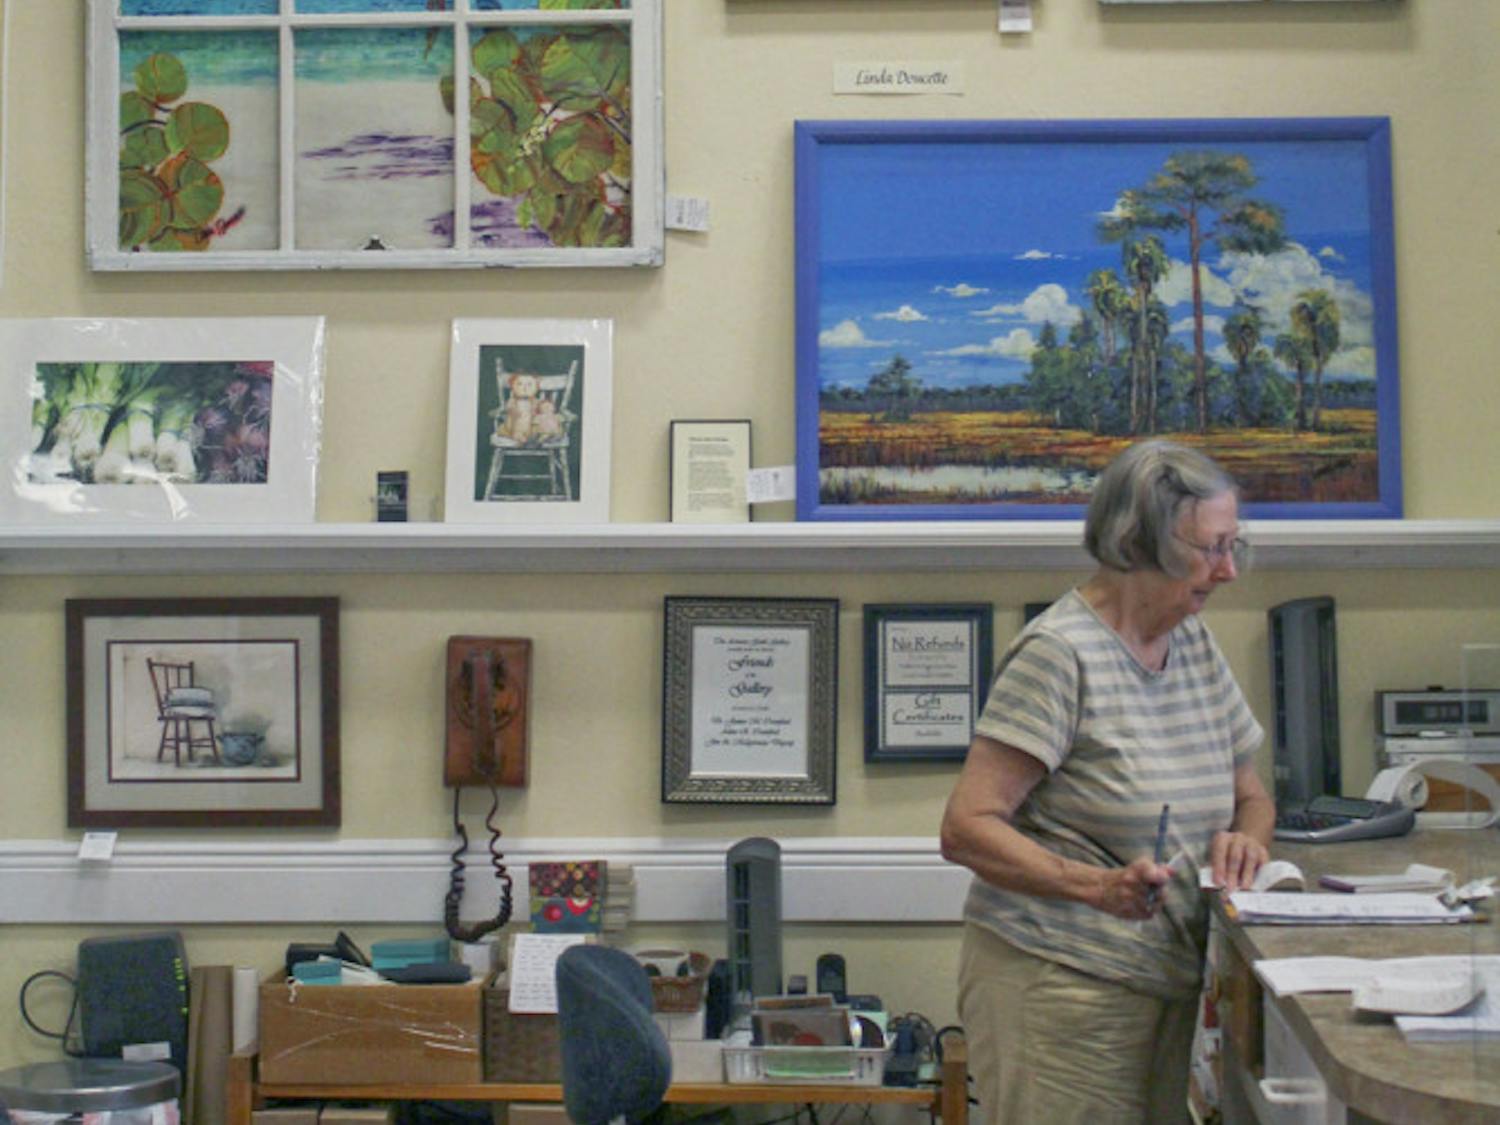 Nancy Gildersleeve, 76, the artist on duty at the Artisan's Guild Gallery, works at the artist's co-op Wednesday afternoon. Its current theme is "Fresh From Florida," in which each artist in the gallery has a piece that encapsulates the Florida theme.